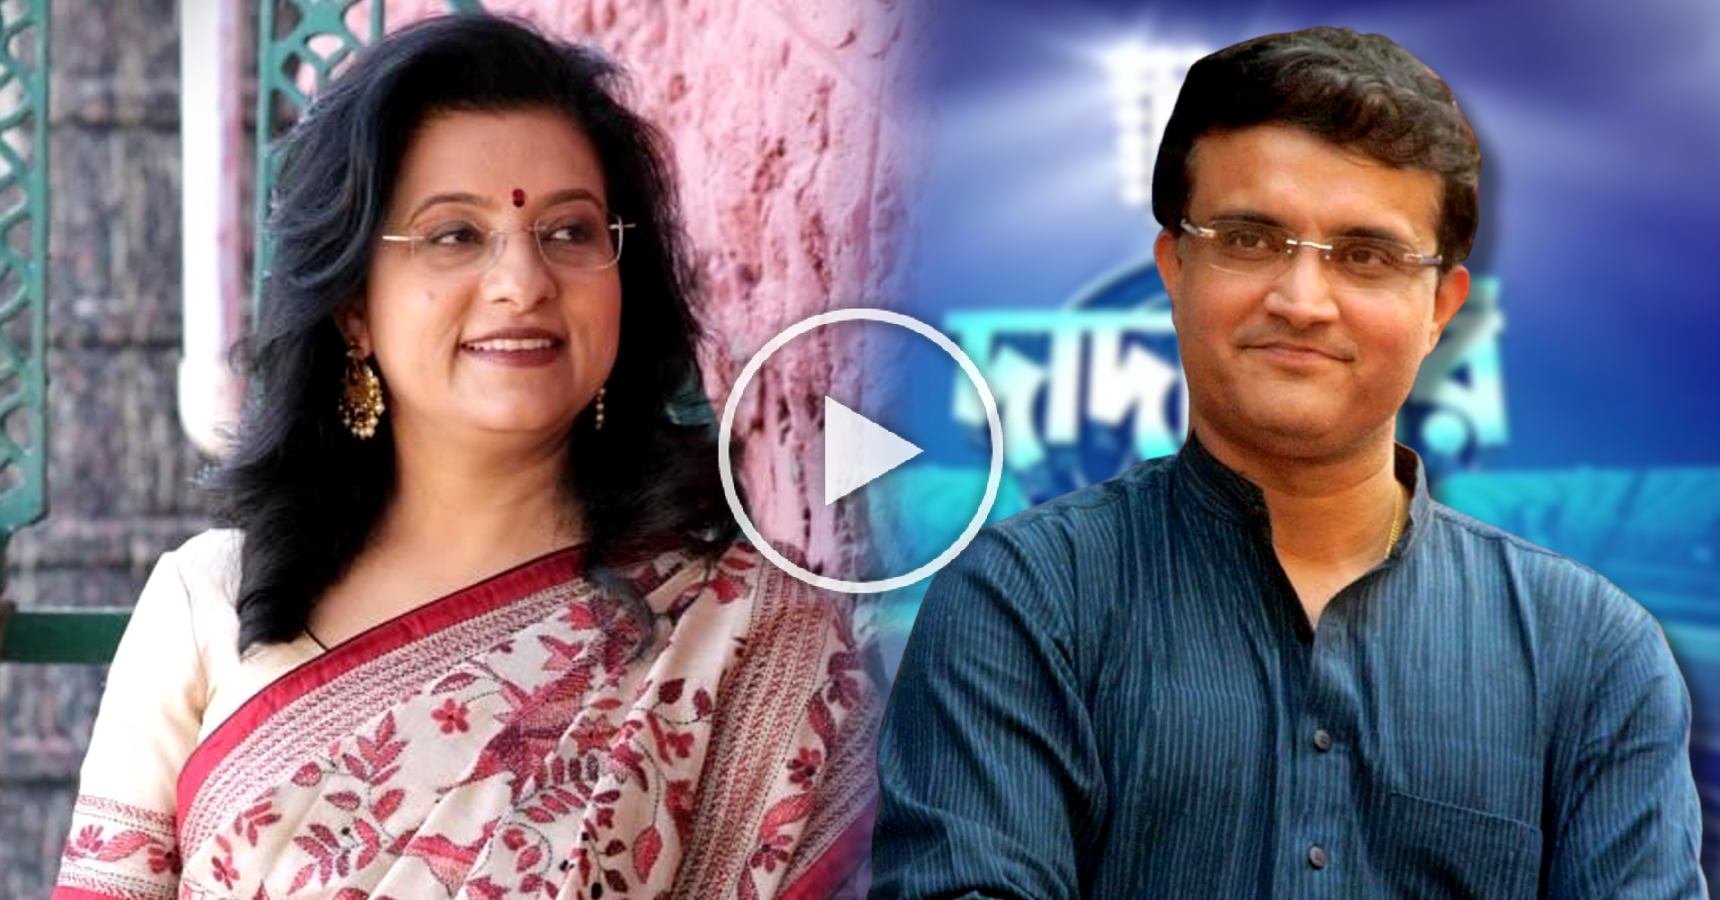 Sourav Ganguly asks about his second marriage probability in Dadagiri video goes viral